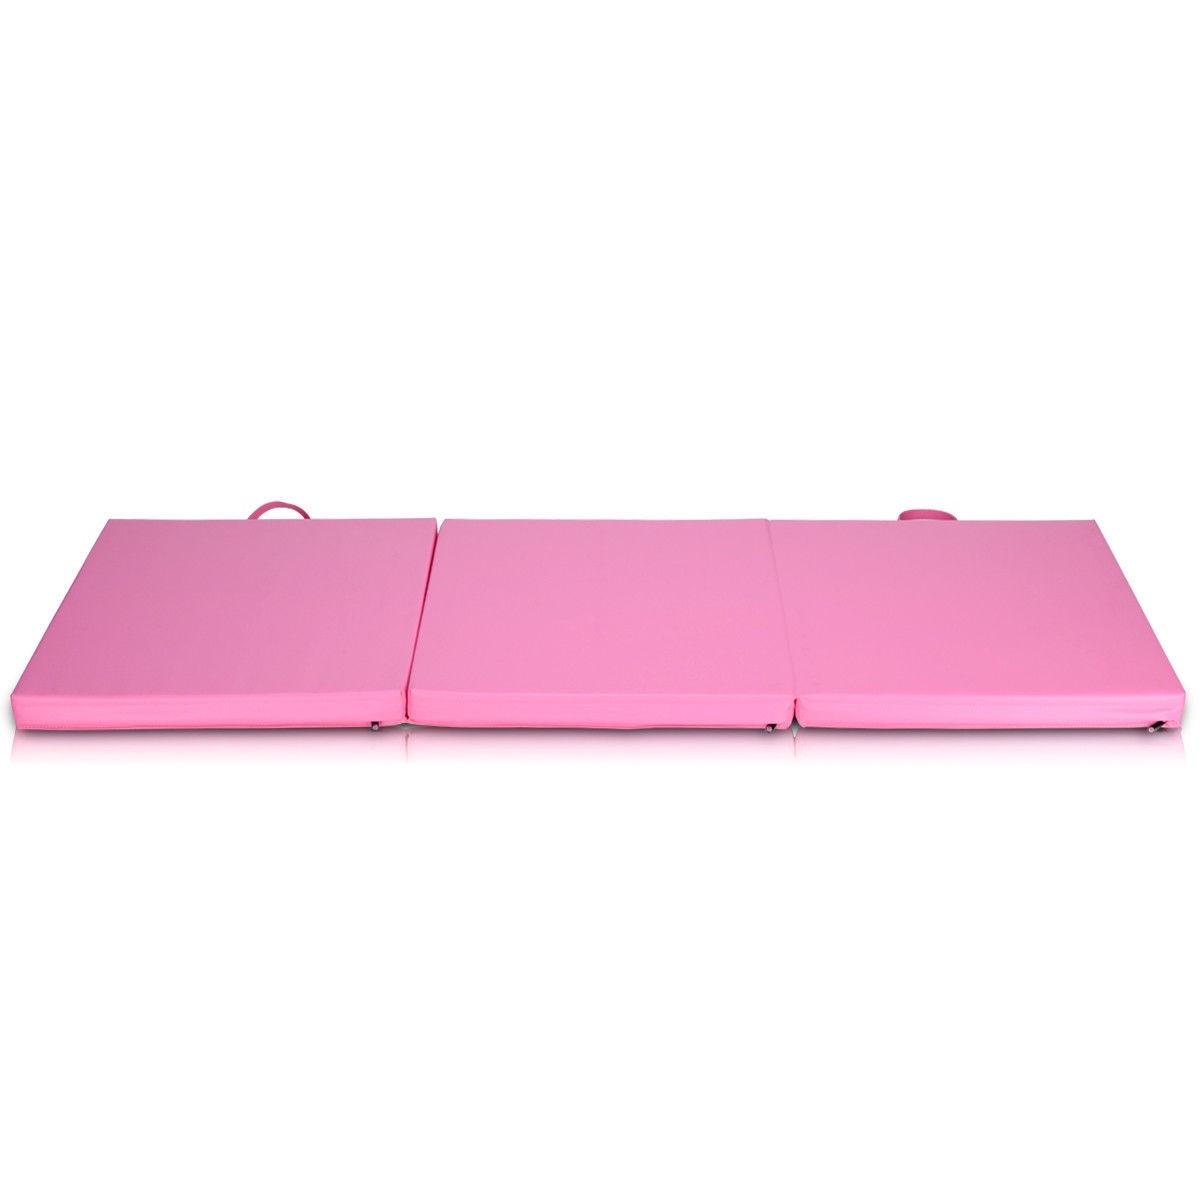 6 Ft. x 2 Ft. Tri-Fold Exercise Gymnastics Mat With Carrying Handles